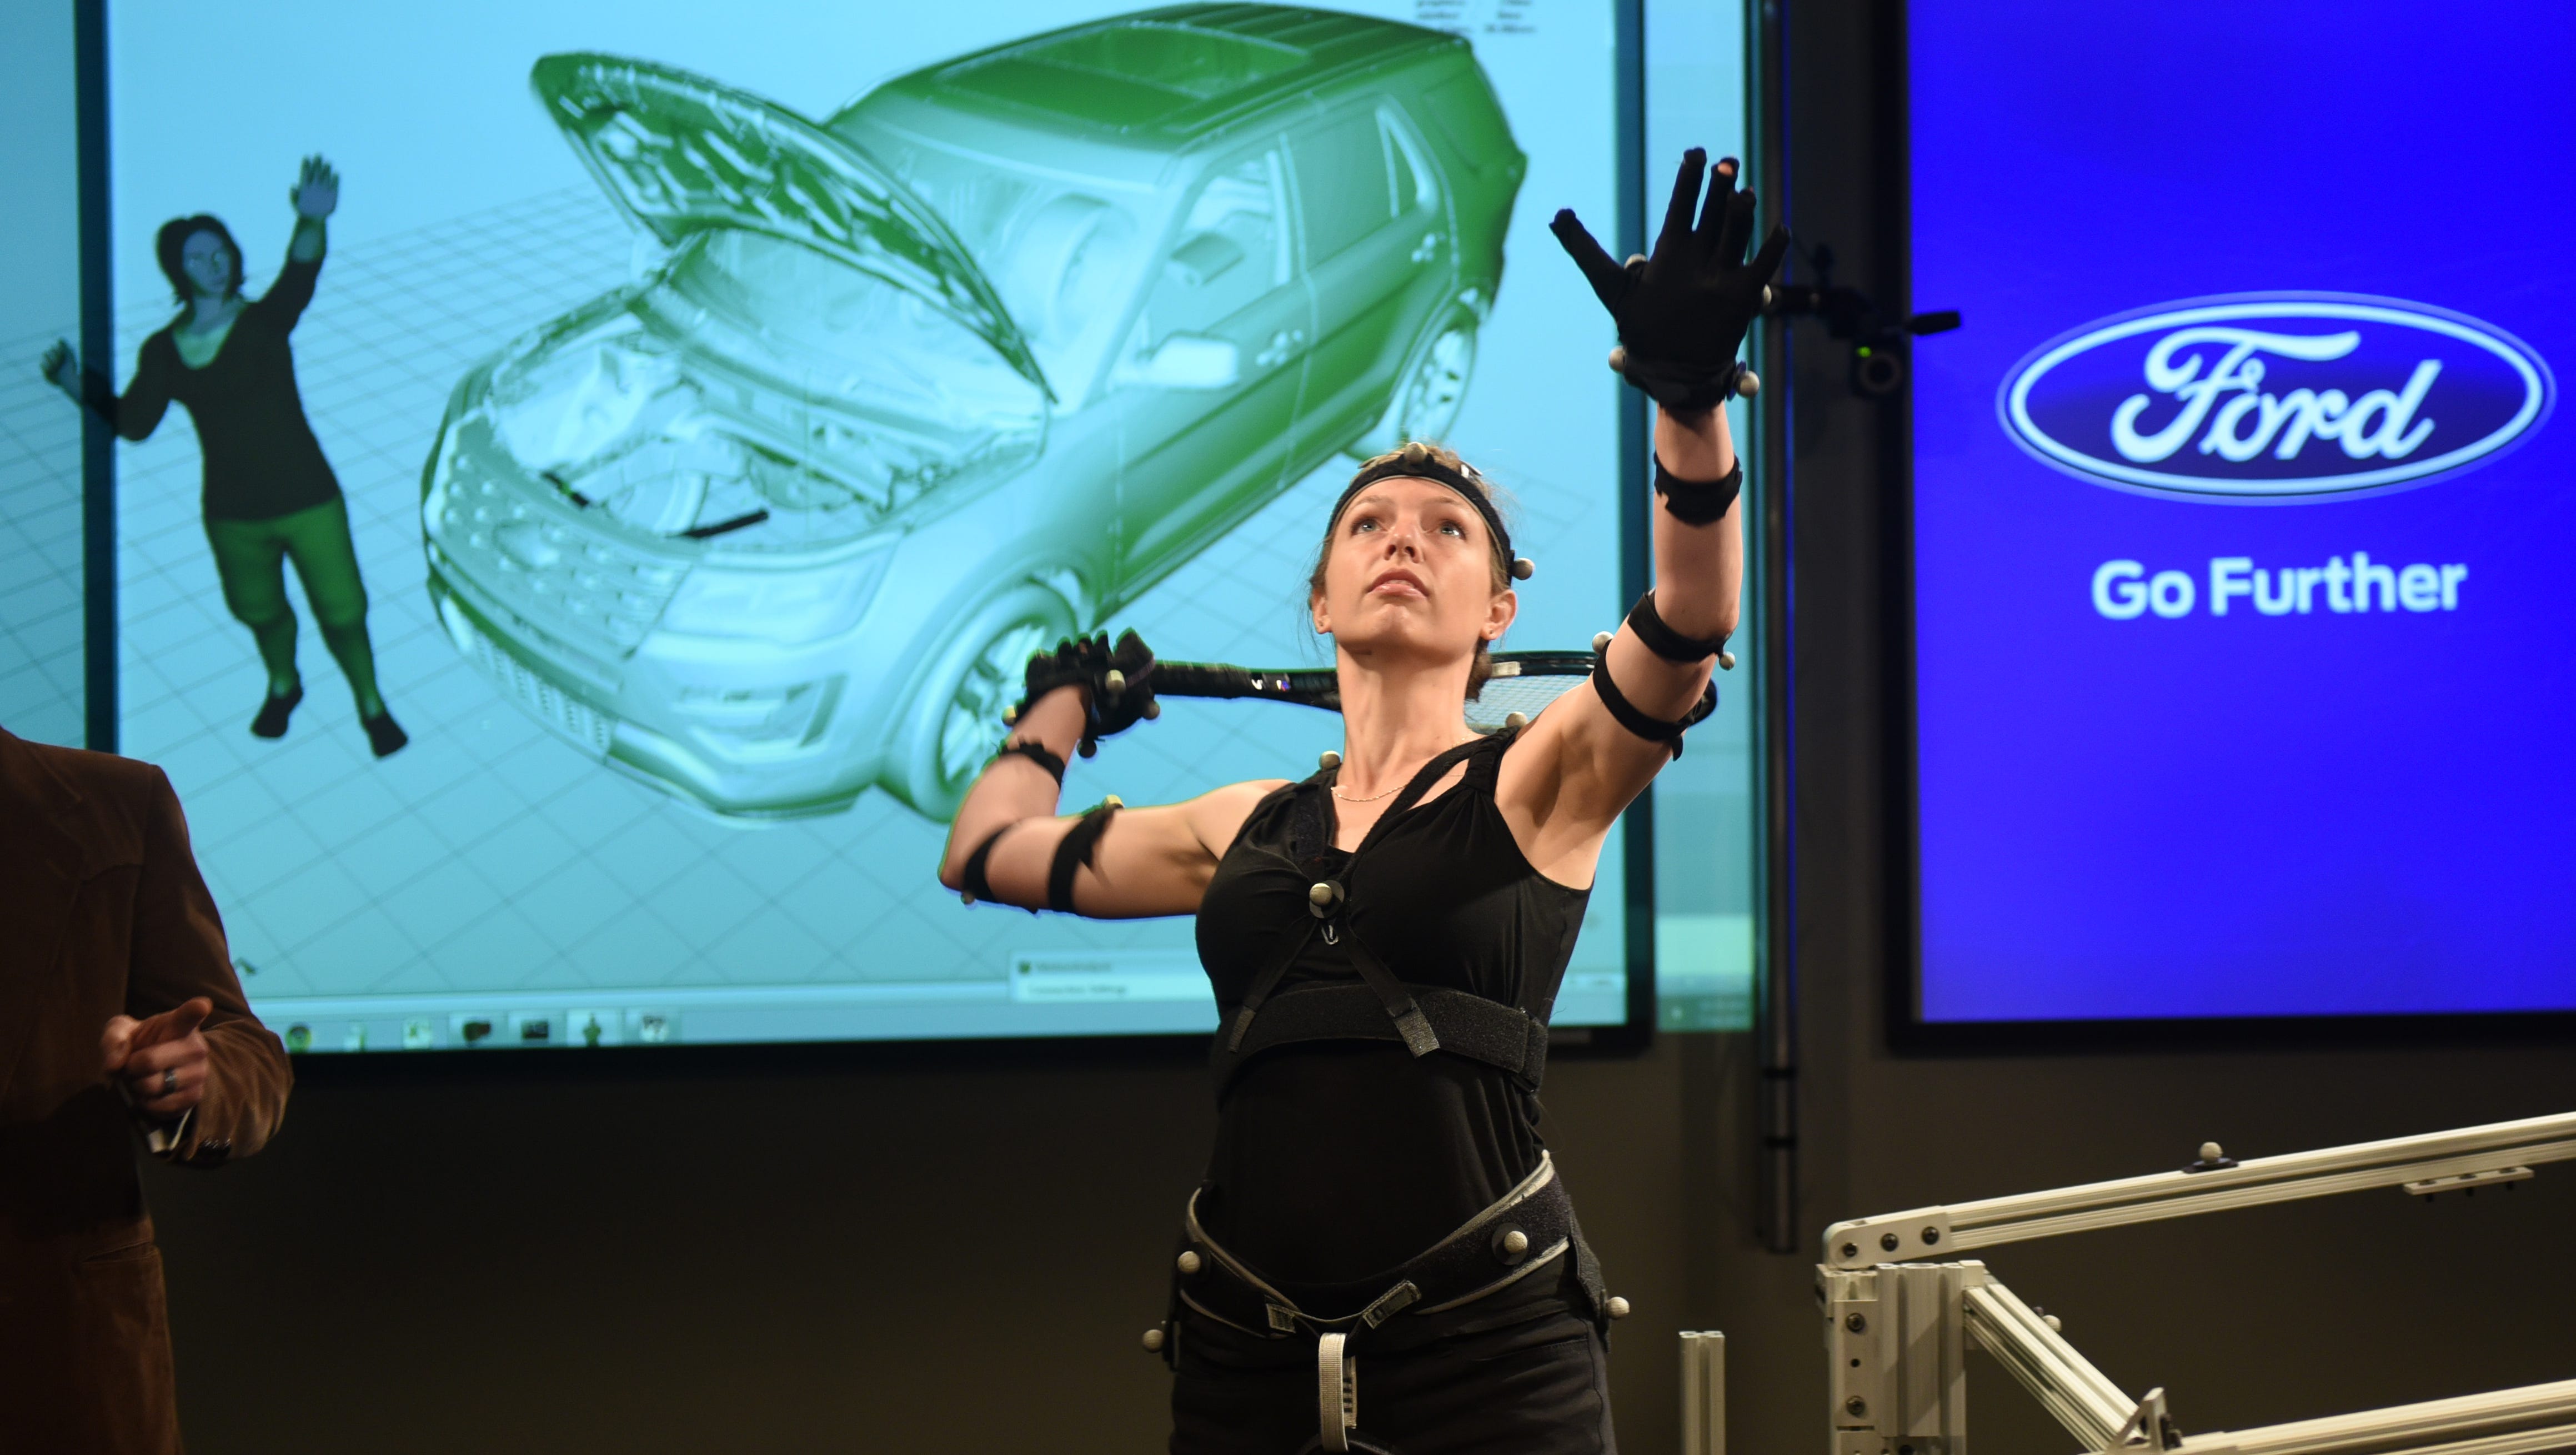 Kali Gawinski demonstrates the full body motion capture part of Ford Motor Co.'s Virtual Manufacturing Technology.